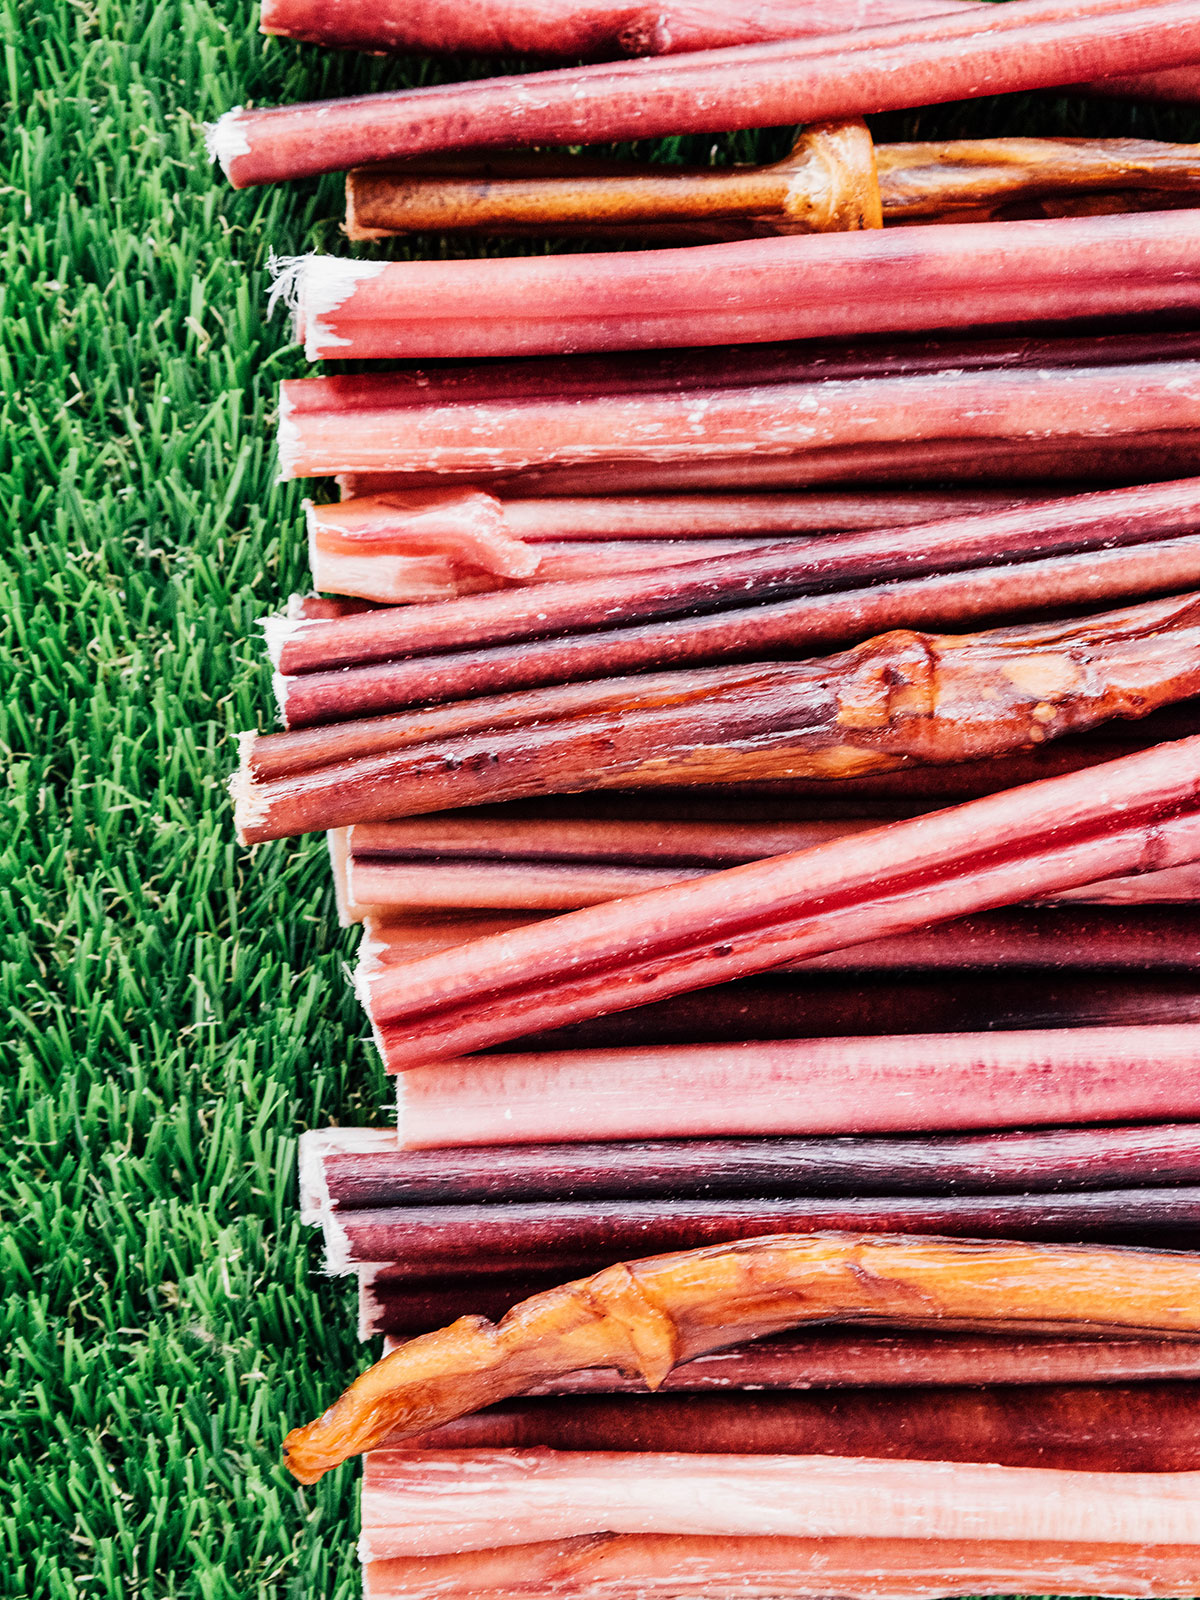 Bully sticks lines up next to each other on grass.